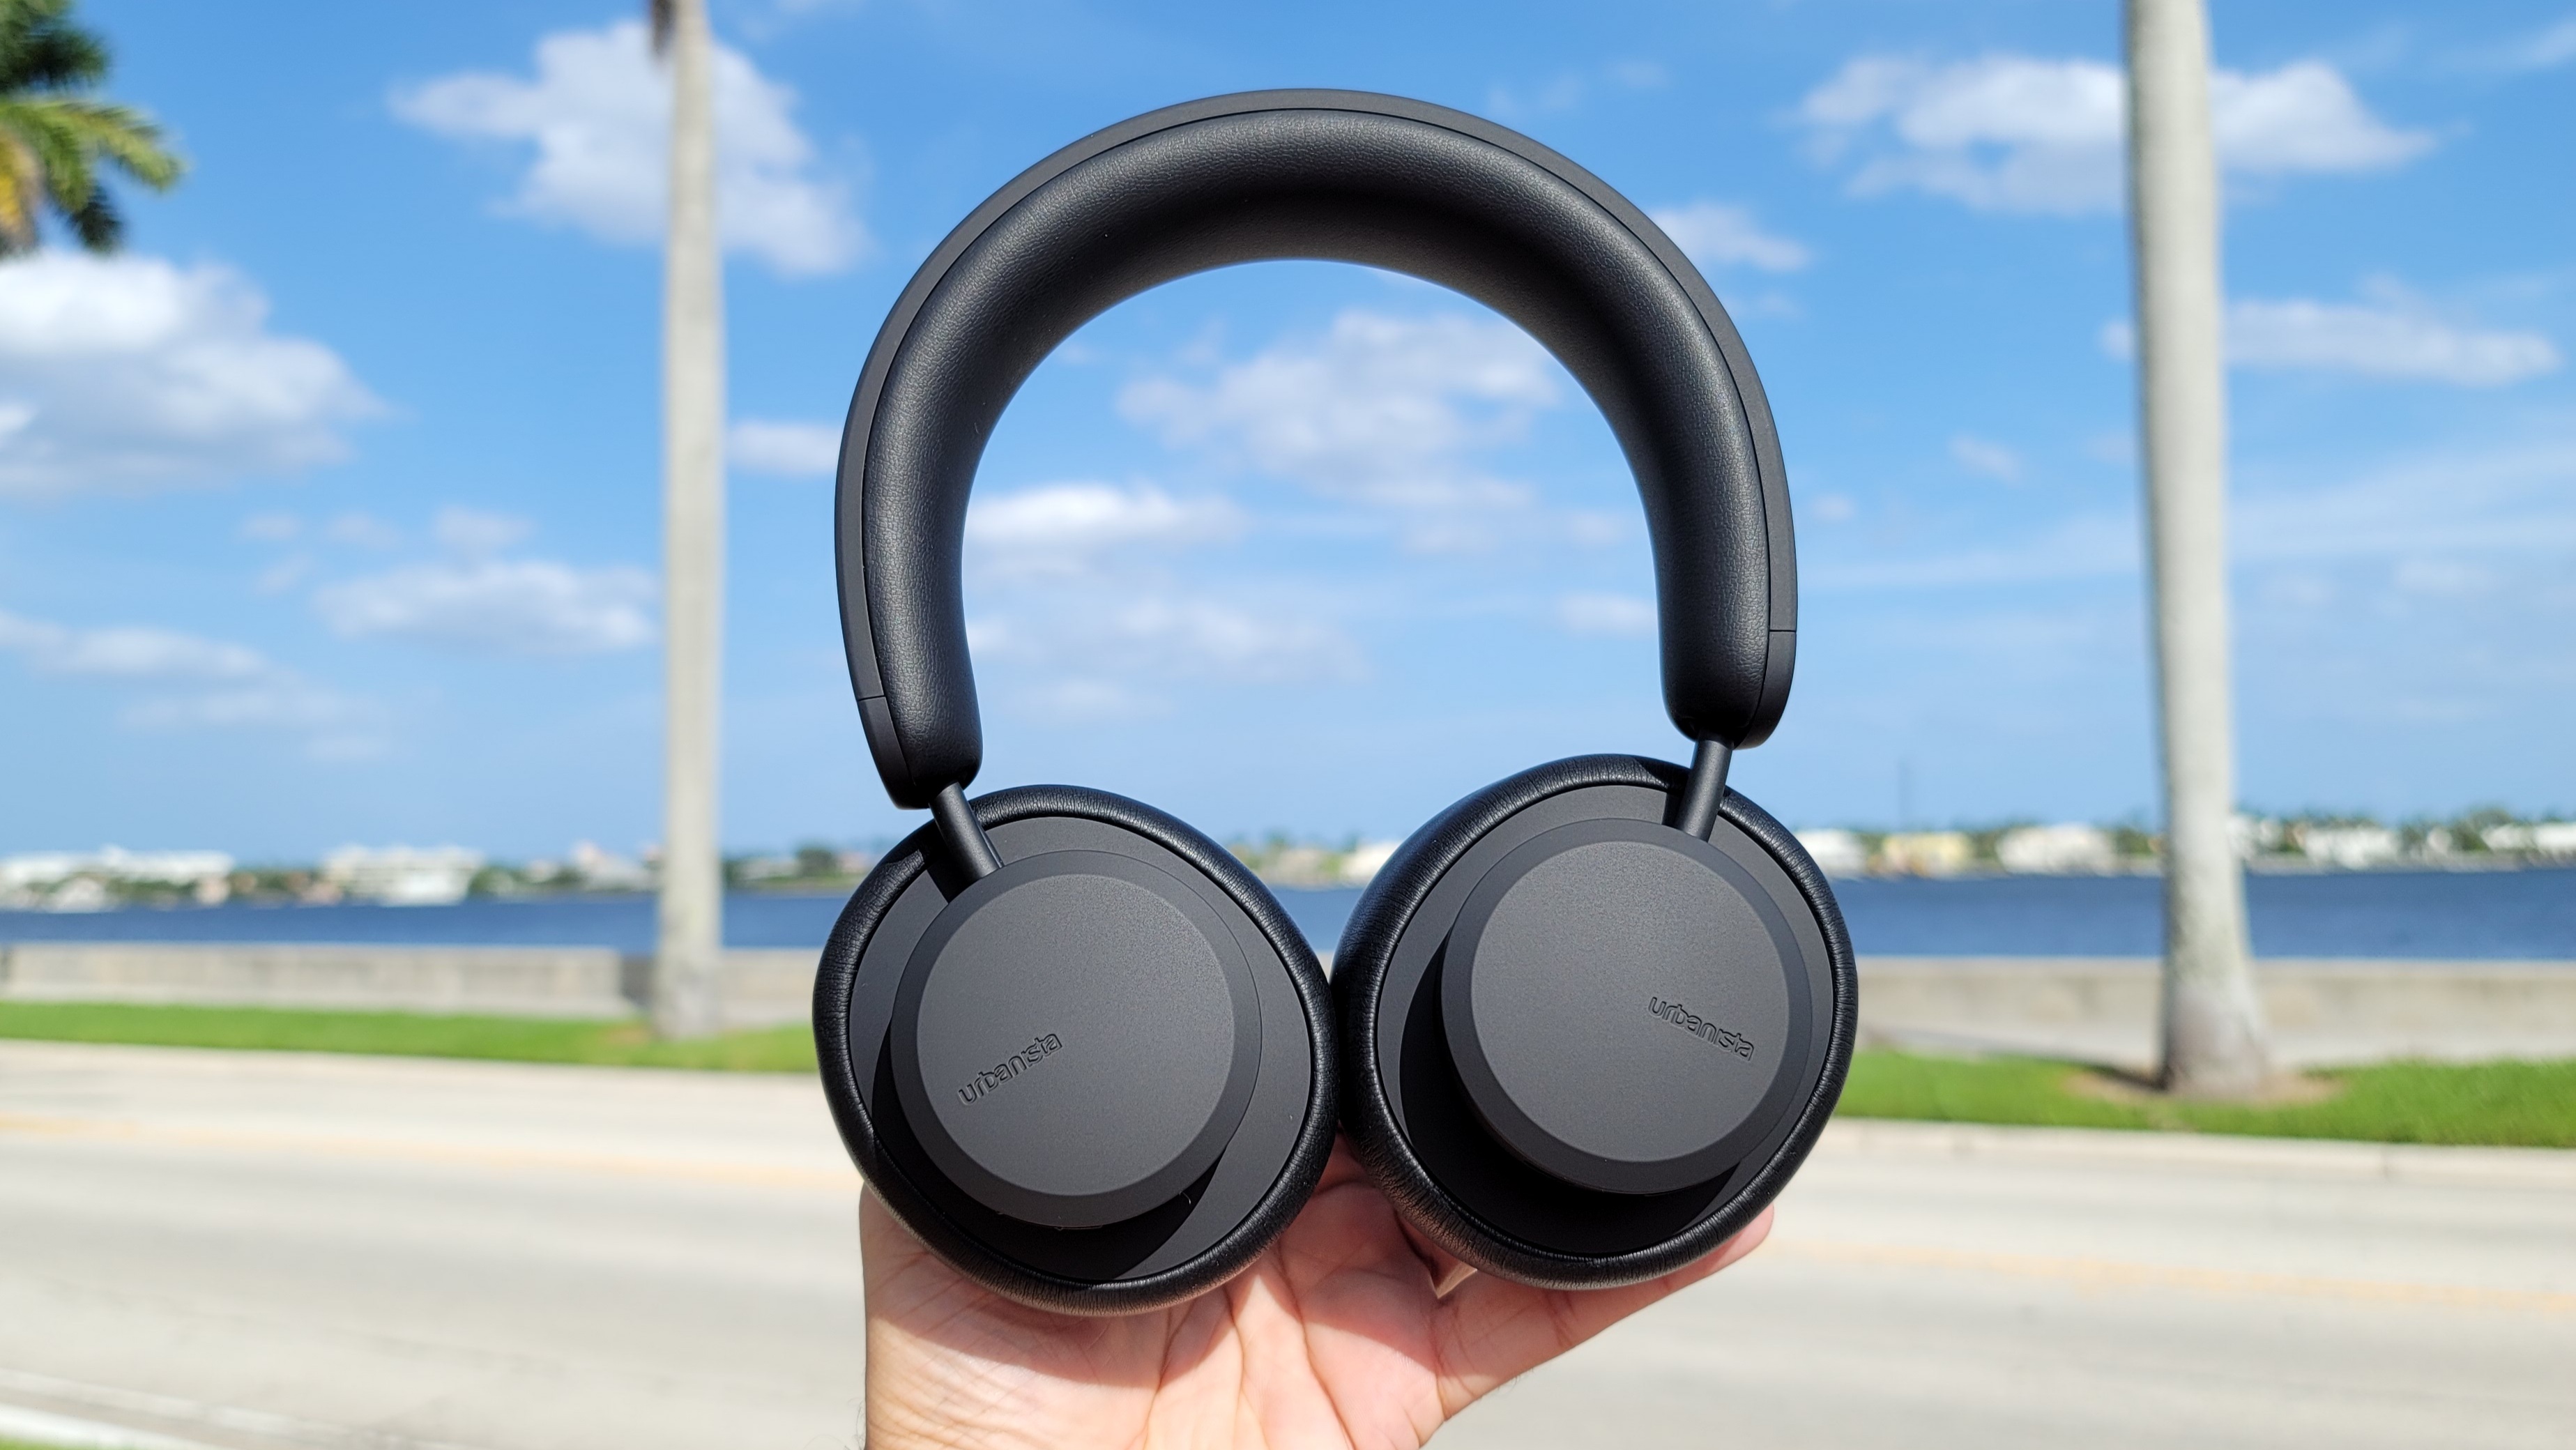 best headphones and earbuds for battery life: Urbanista Los Angeles